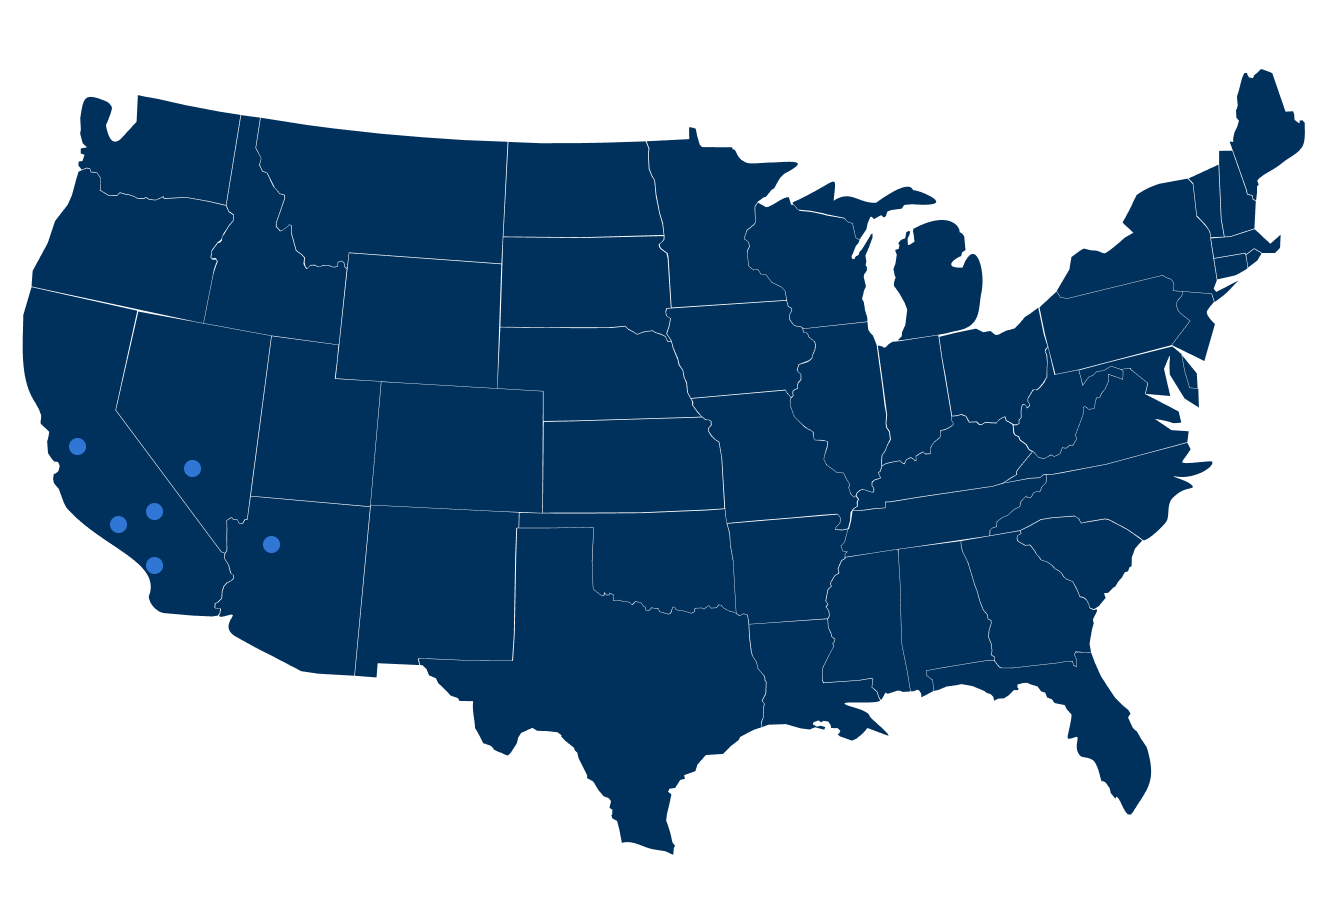 Map indicating Deliver-IT coverage area includes California, Arizona, and Nevada